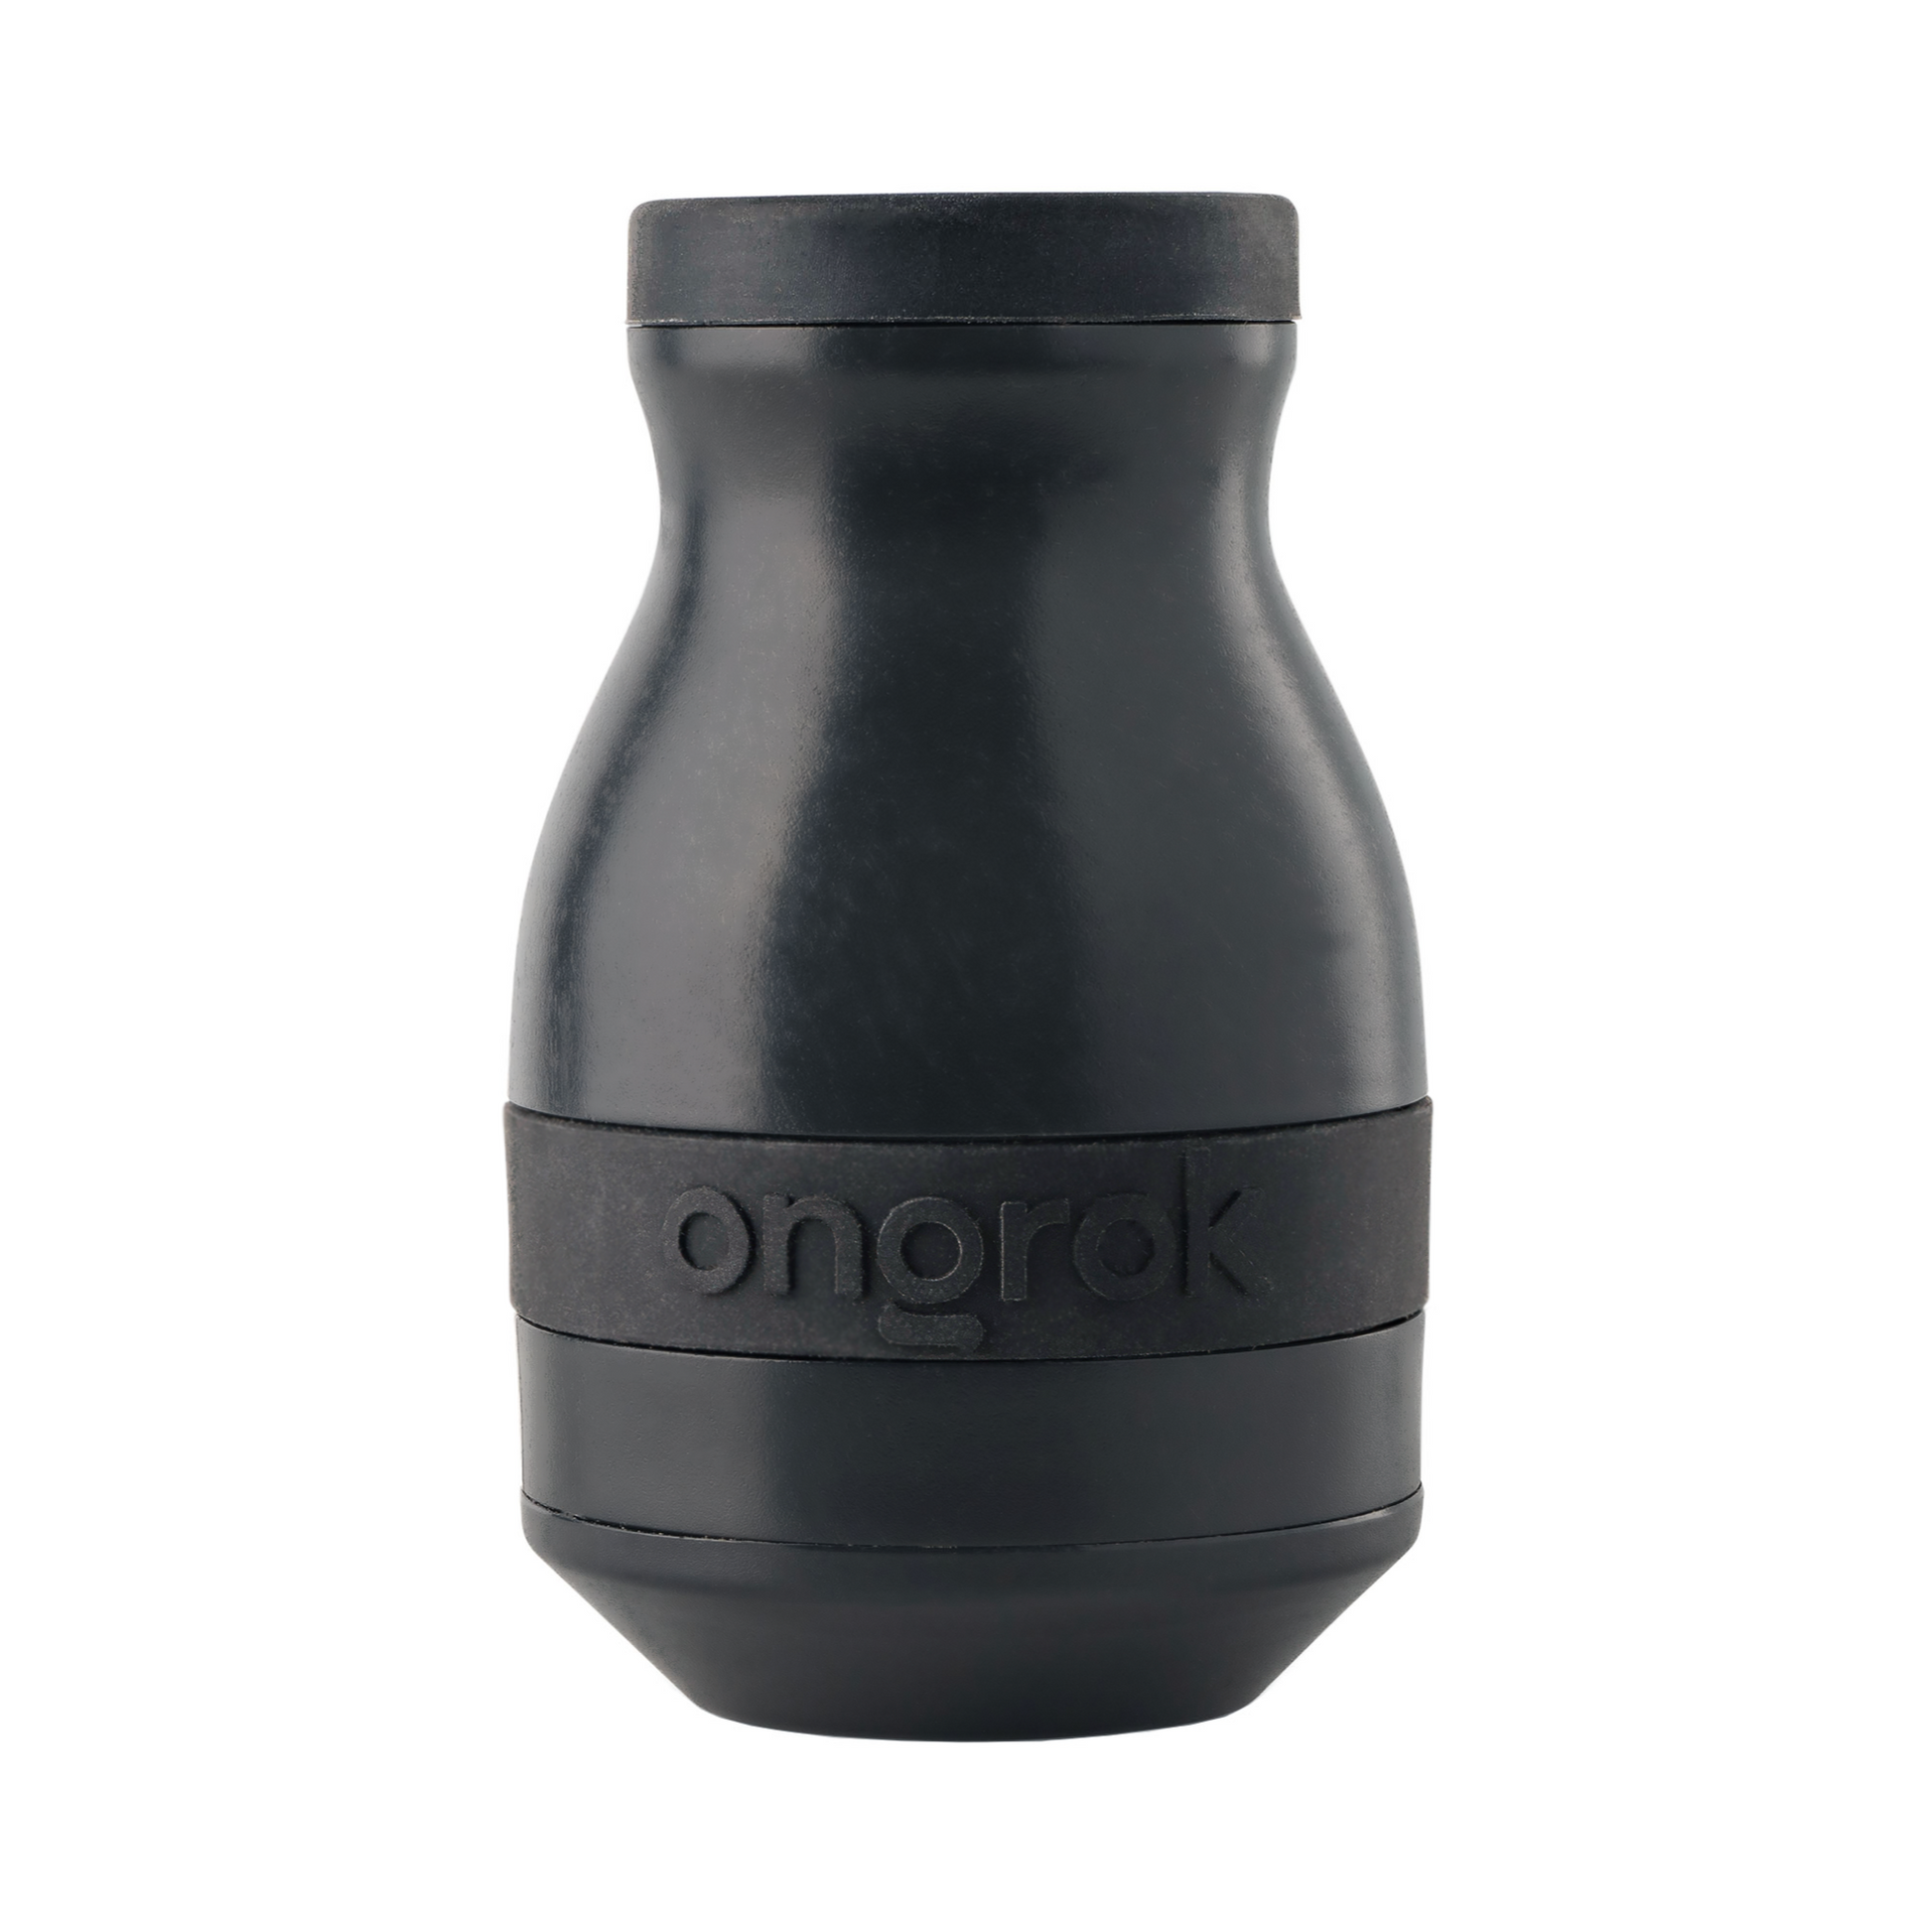 Ongrok Sploof Air Filter by Ongrok | Mission Dispensary